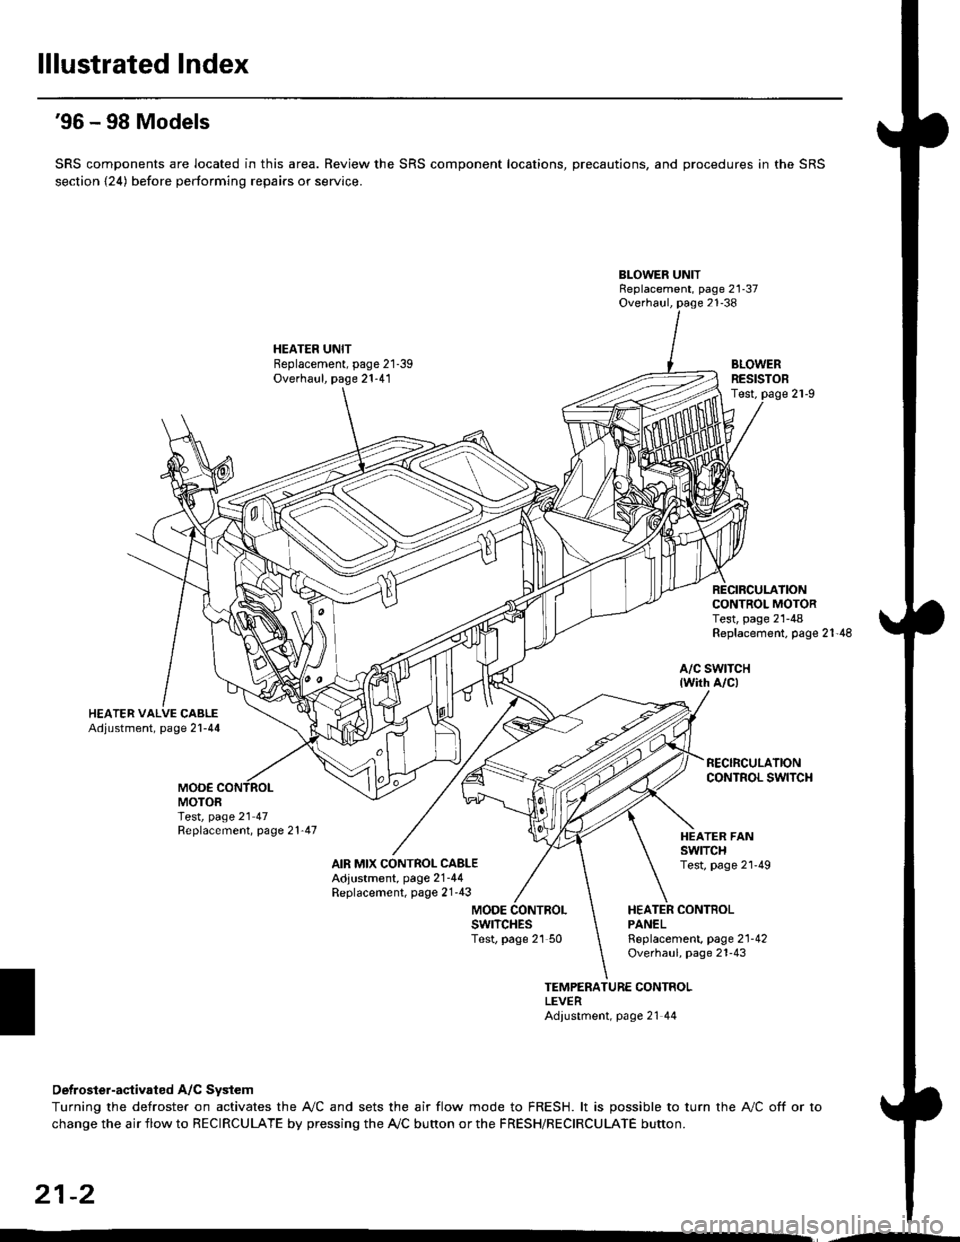 HONDA CIVIC 2000 6.G Workshop Manual lllustrated Index
96 - 98 Models
SRS components are located in this area. Review the SRS component locations, precautions, and procedures in the SRS
section {24) before performing repairs or service.